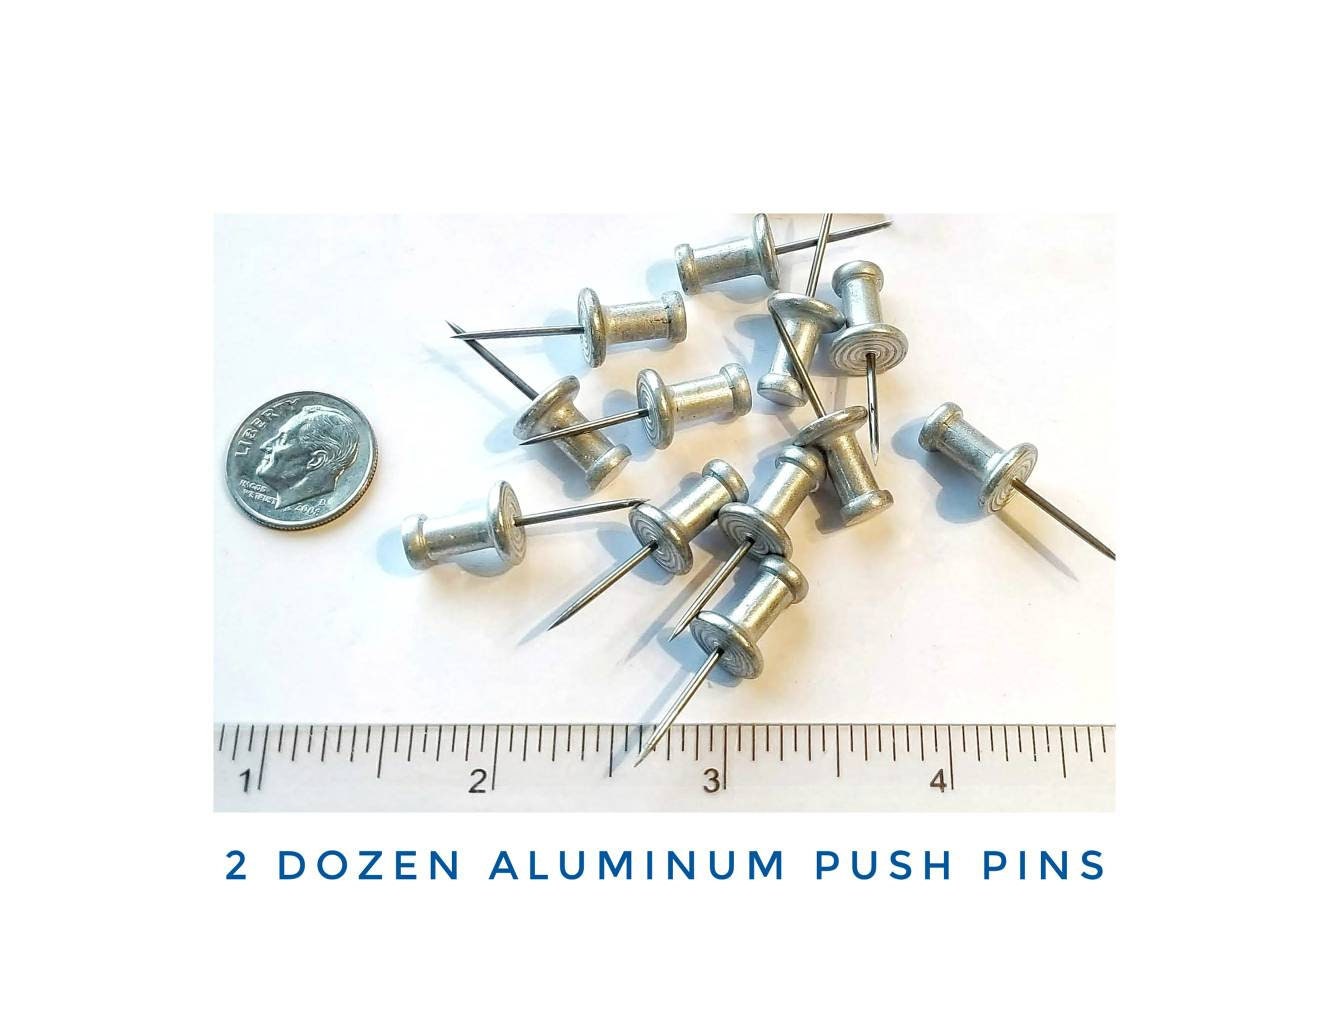 Aluminum Push Pins, 2 Dozen. Secure Your Stained Glass Pieces. Foil or Lead Came. String Art, Jewelry, Metal Art Collage.